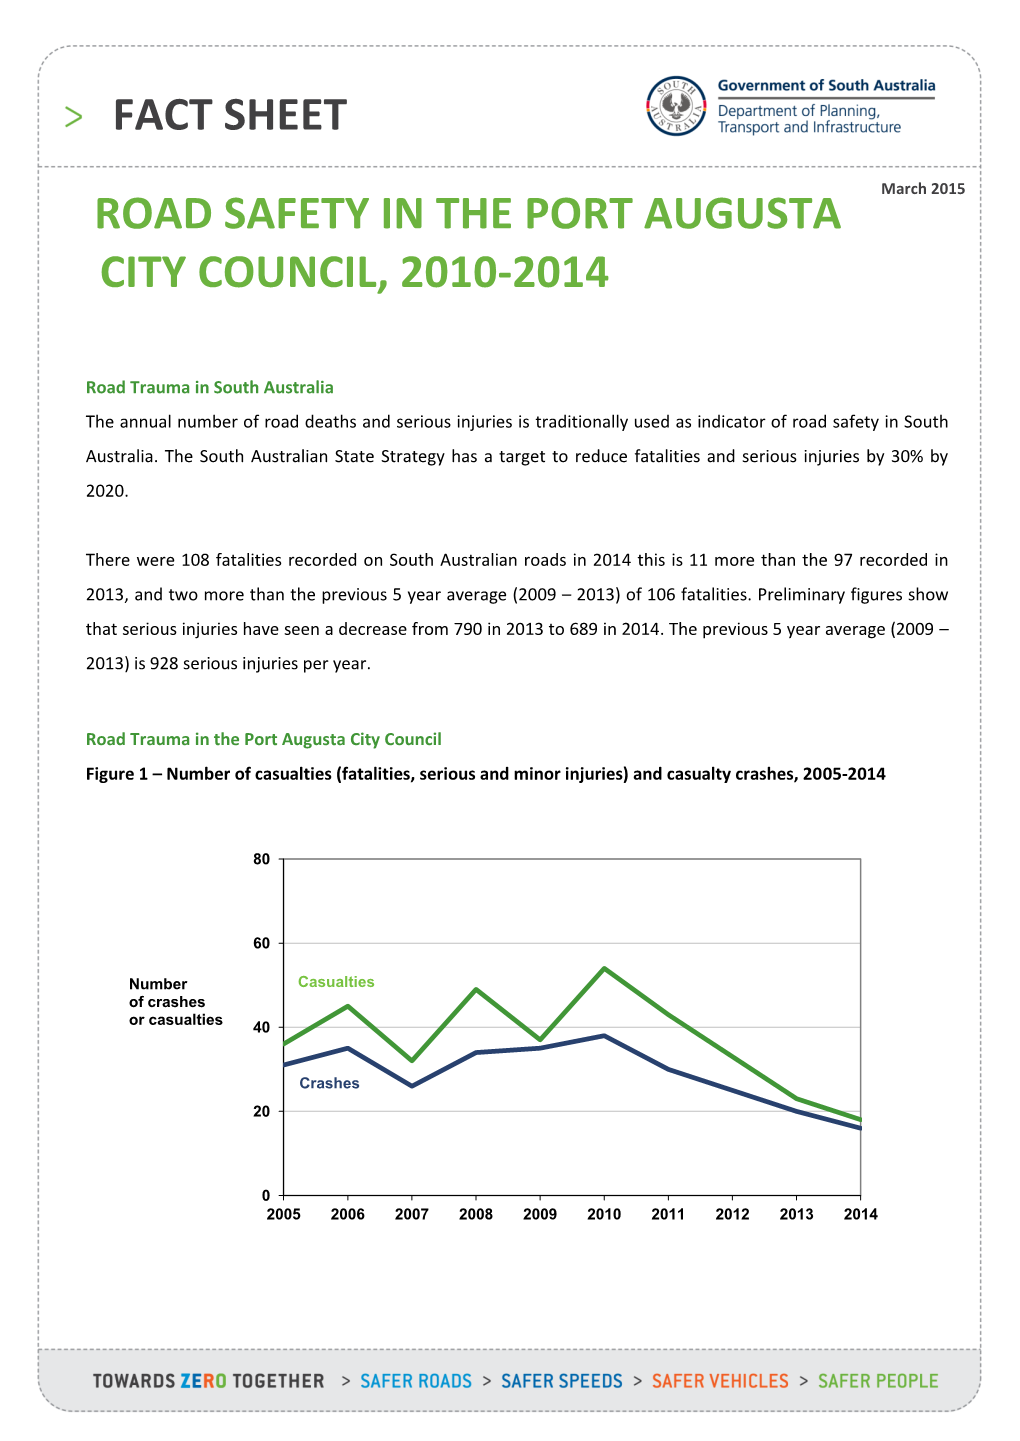 Road Safety in the Port Augusta City Council, 2010-2014